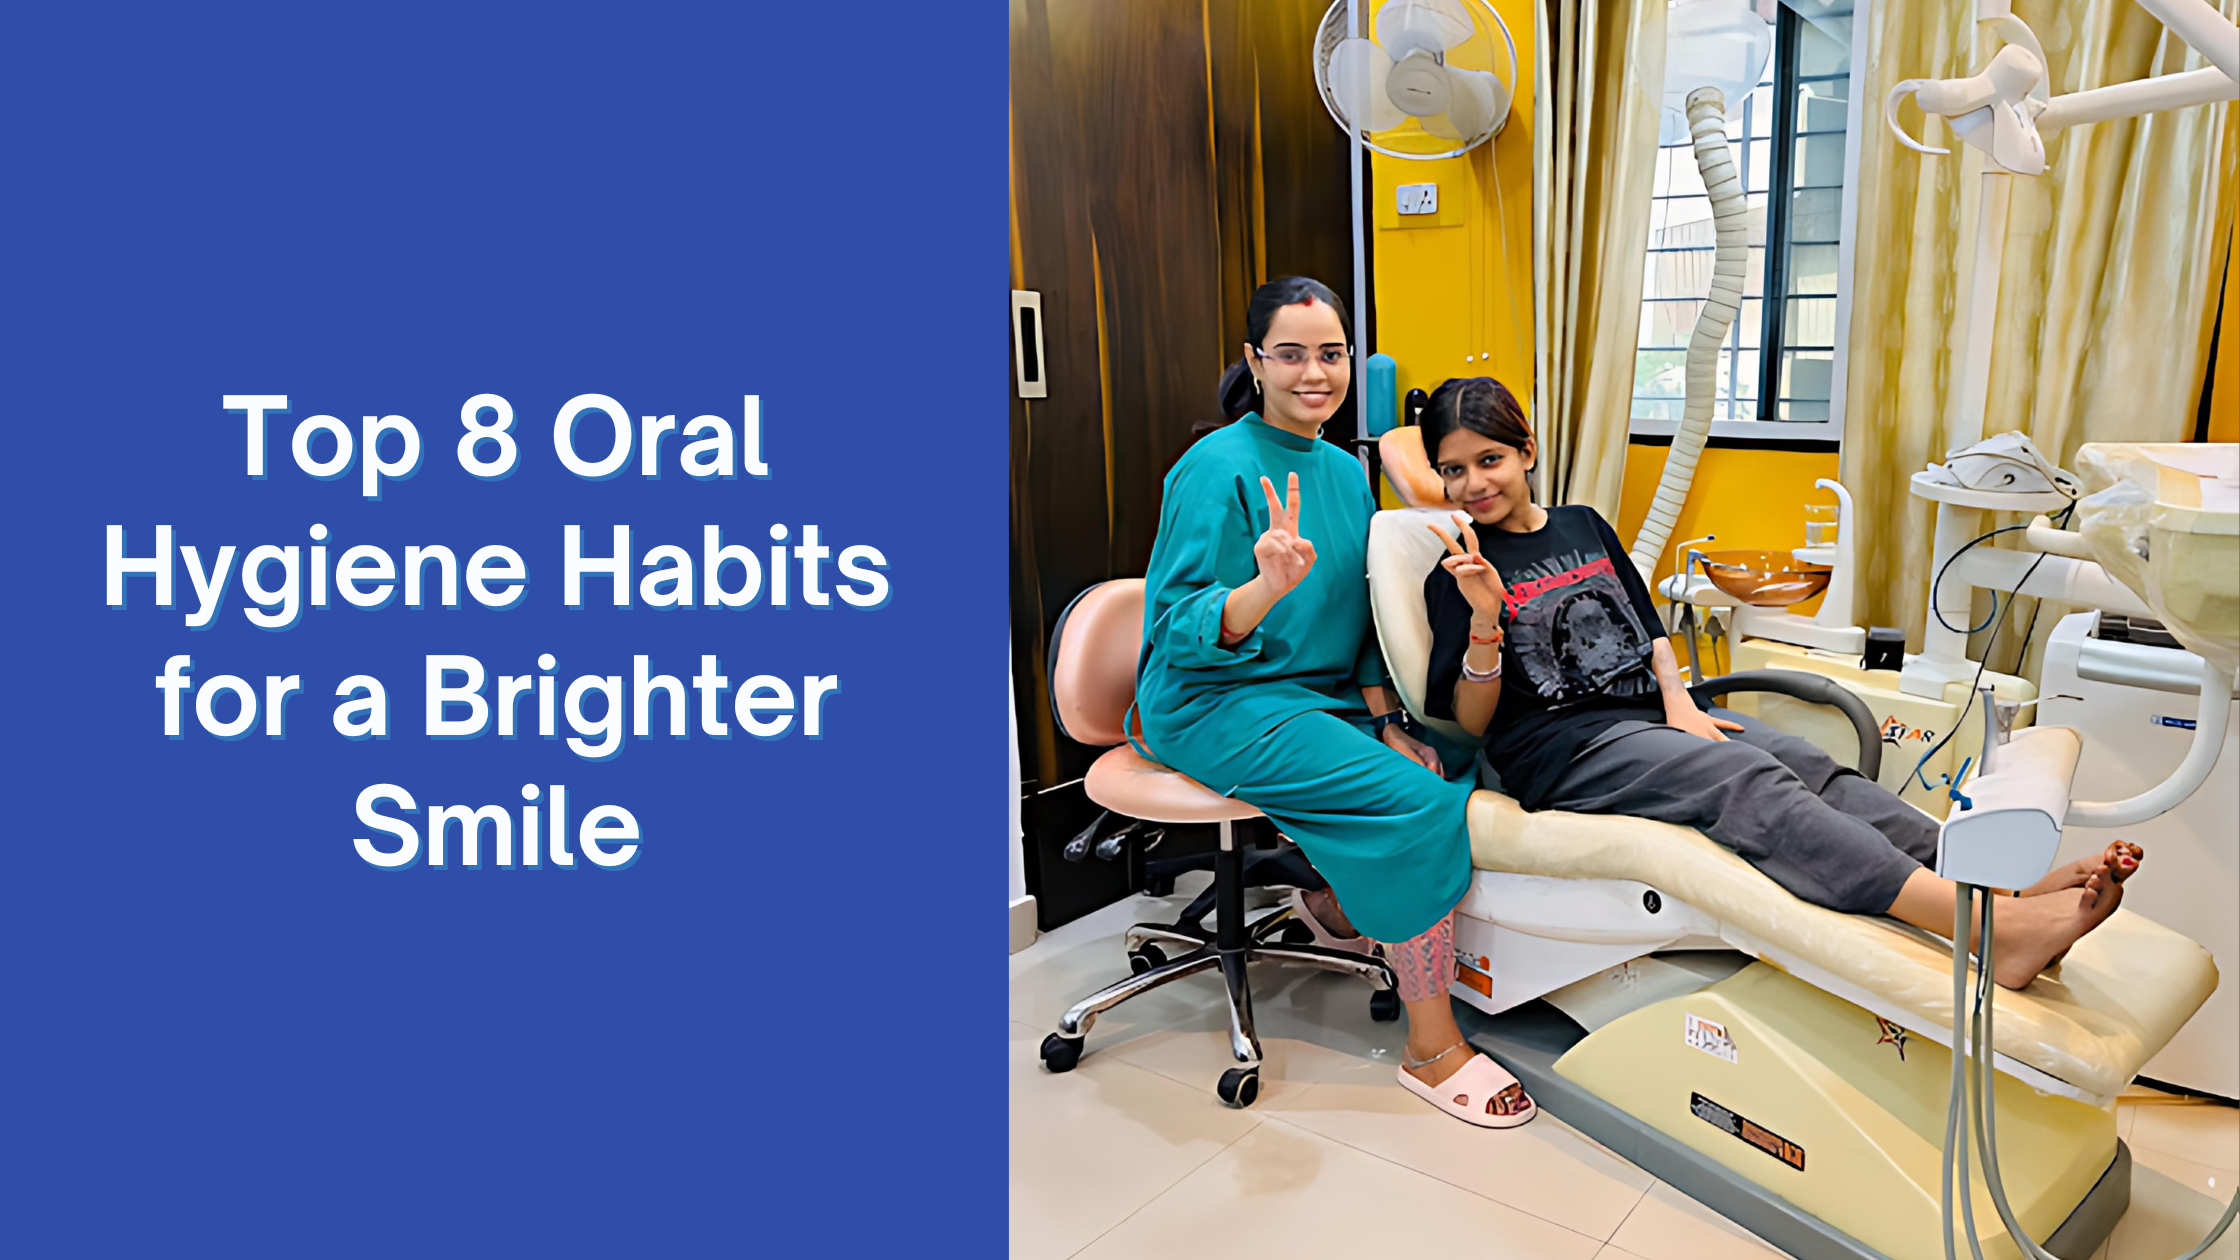 Top 8 Oral Hygiene Habits for a Brighter Smile